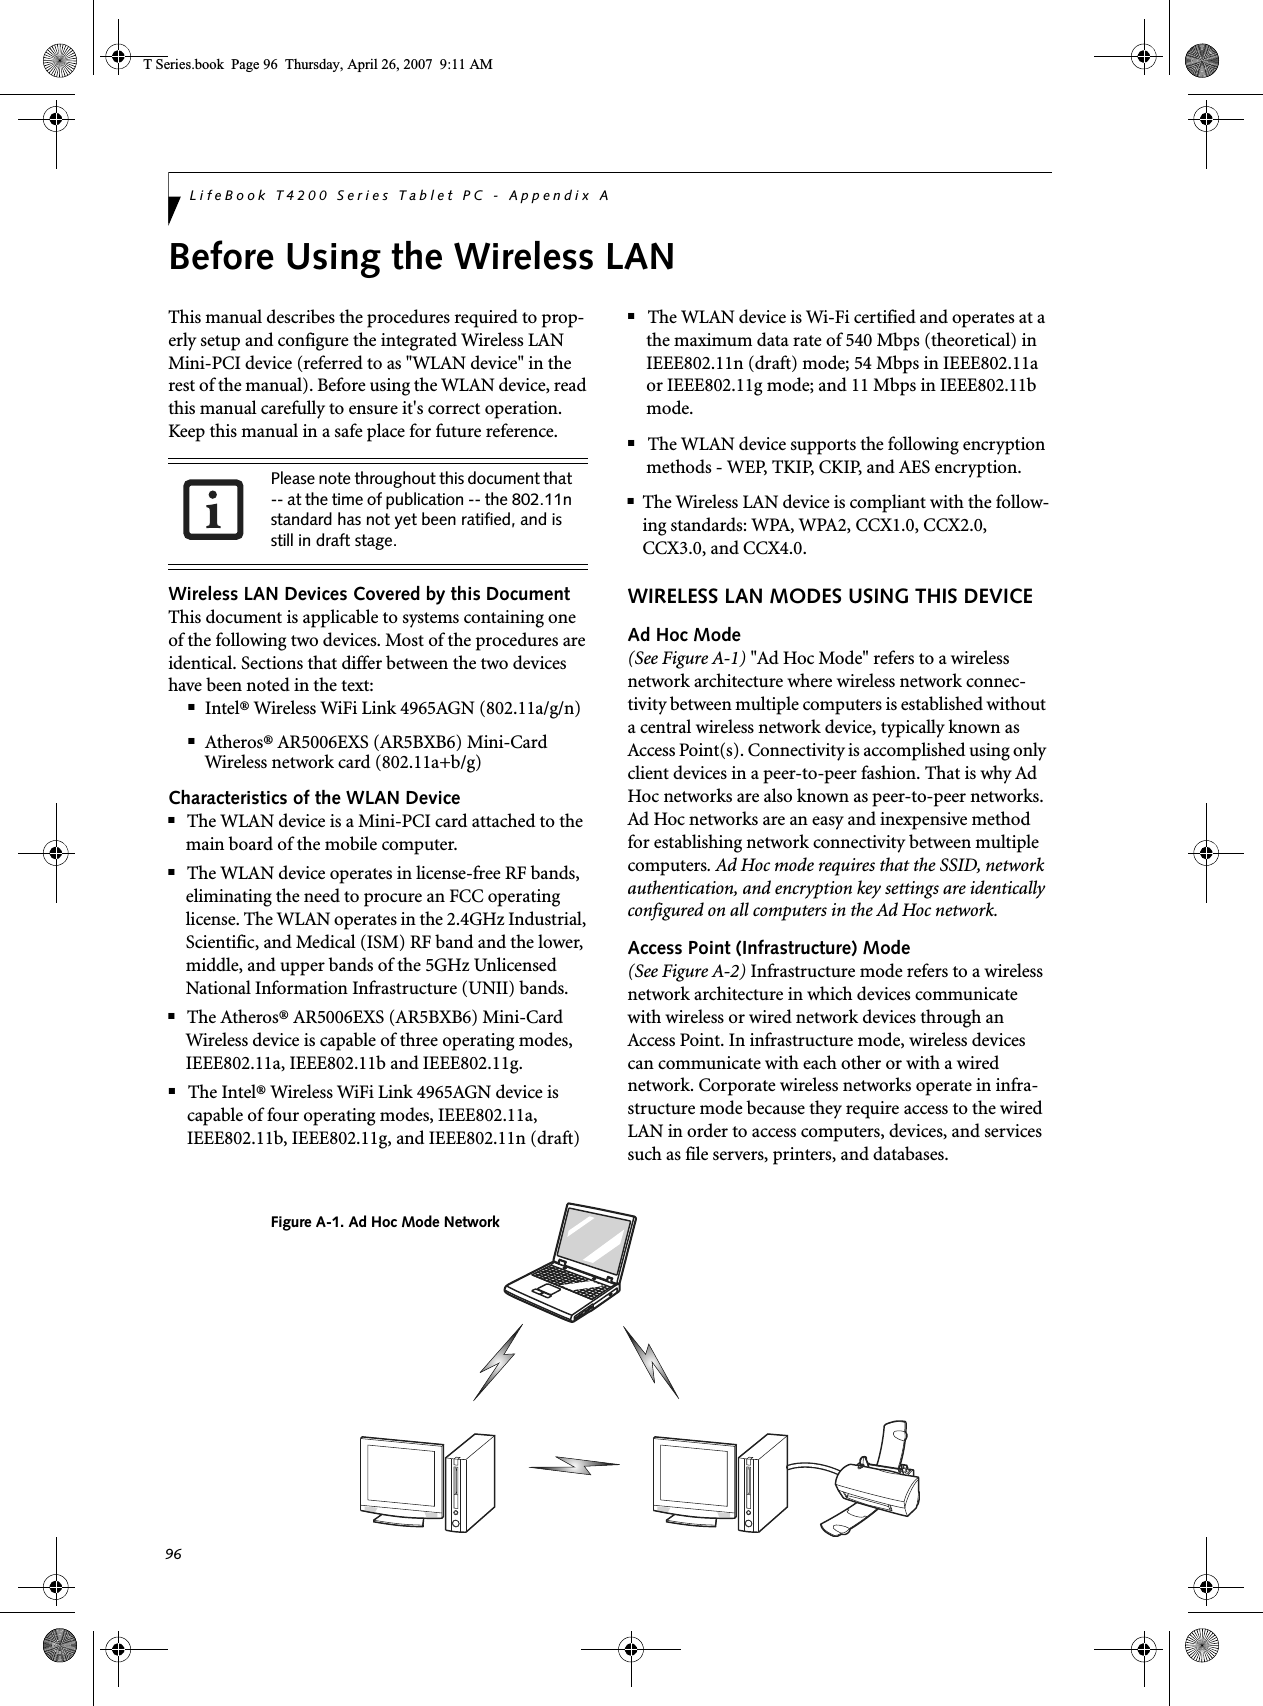 96LifeBook T4200 Series Tablet PC - Appendix ABefore Using the Wireless LANThis manual describes the procedures required to prop-erly setup and configure the integrated Wireless LAN Mini-PCI device (referred to as &quot;WLAN device&quot; in the rest of the manual). Before using the WLAN device, read this manual carefully to ensure it&apos;s correct operation. Keep this manual in a safe place for future reference.Wireless LAN Devices Covered by this DocumentThis document is applicable to systems containing one of the following two devices. Most of the procedures are identical. Sections that differ between the two devices have been noted in the text:■Intel® Wireless WiFi Link 4965AGN (802.11a/g/n) ■Atheros® AR5006EXS (AR5BXB6) Mini-Card Wireless network card (802.11a+b/g) Characteristics of the WLAN Device■The WLAN device is a Mini-PCI card attached to the main board of the mobile computer. ■The WLAN device operates in license-free RF bands, eliminating the need to procure an FCC operating license. The WLAN operates in the 2.4GHz Industrial, Scientific, and Medical (ISM) RF band and the lower, middle, and upper bands of the 5GHz Unlicensed National Information Infrastructure (UNII) bands. ■The Atheros® AR5006EXS (AR5BXB6) Mini-Card Wireless device is capable of three operating modes, IEEE802.11a, IEEE802.11b and IEEE802.11g. ■The Intel® Wireless WiFi Link 4965AGN device is capable of four operating modes, IEEE802.11a, IEEE802.11b, IEEE802.11g, and IEEE802.11n (draft)■The WLAN device is Wi-Fi certified and operates at a the maximum data rate of 540 Mbps (theoretical) in IEEE802.11n (draft) mode; 54 Mbps in IEEE802.11a or IEEE802.11g mode; and 11 Mbps in IEEE802.11b mode.■The WLAN device supports the following encryption methods - WEP, TKIP, CKIP, and AES encryption.■The Wireless LAN device is compliant with the follow-ing standards: WPA, WPA2, CCX1.0, CCX2.0, CCX3.0, and CCX4.0.WIRELESS LAN MODES USING THIS DEVICEAd Hoc Mode (See Figure A-1) &quot;Ad Hoc Mode&quot; refers to a wireless network architecture where wireless network connec-tivity between multiple computers is established without a central wireless network device, typically known as Access Point(s). Connectivity is accomplished using only client devices in a peer-to-peer fashion. That is why Ad Hoc networks are also known as peer-to-peer networks. Ad Hoc networks are an easy and inexpensive method for establishing network connectivity between multiple computers. Ad Hoc mode requires that the SSID, network authentication, and encryption key settings are identically configured on all computers in the Ad Hoc network. Access Point (Infrastructure) Mode (See Figure A-2) Infrastructure mode refers to a wireless network architecture in which devices communicate with wireless or wired network devices through an Access Point. In infrastructure mode, wireless devices can communicate with each other or with a wired network. Corporate wireless networks operate in infra-structure mode because they require access to the wired LAN in order to access computers, devices, and services such as file servers, printers, and databases.Please note throughout this document that -- at the time of publication -- the 802.11n standard has not yet been ratified, and is still in draft stage.Figure A-1. Ad Hoc Mode NetworkT Series.book  Page 96  Thursday, April 26, 2007  9:11 AM